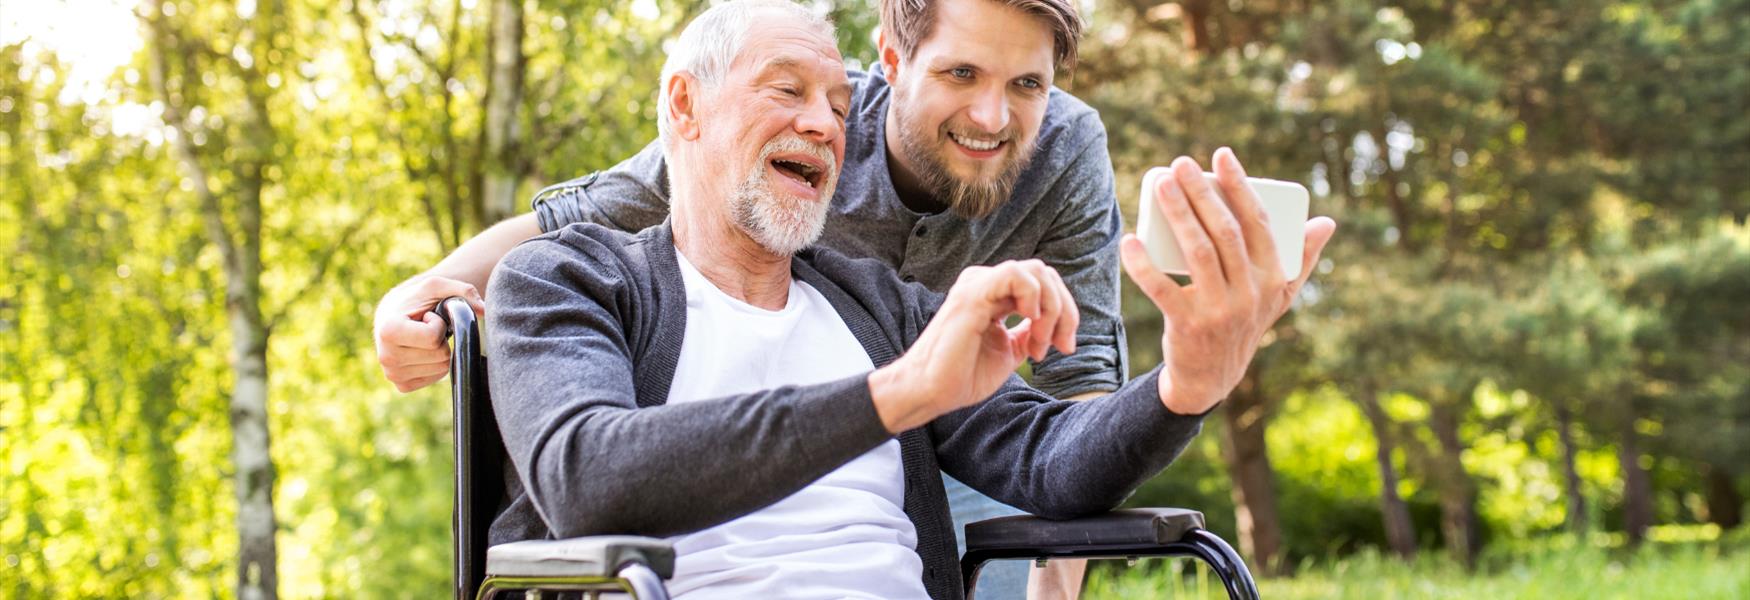 old man in wheelchair with young man